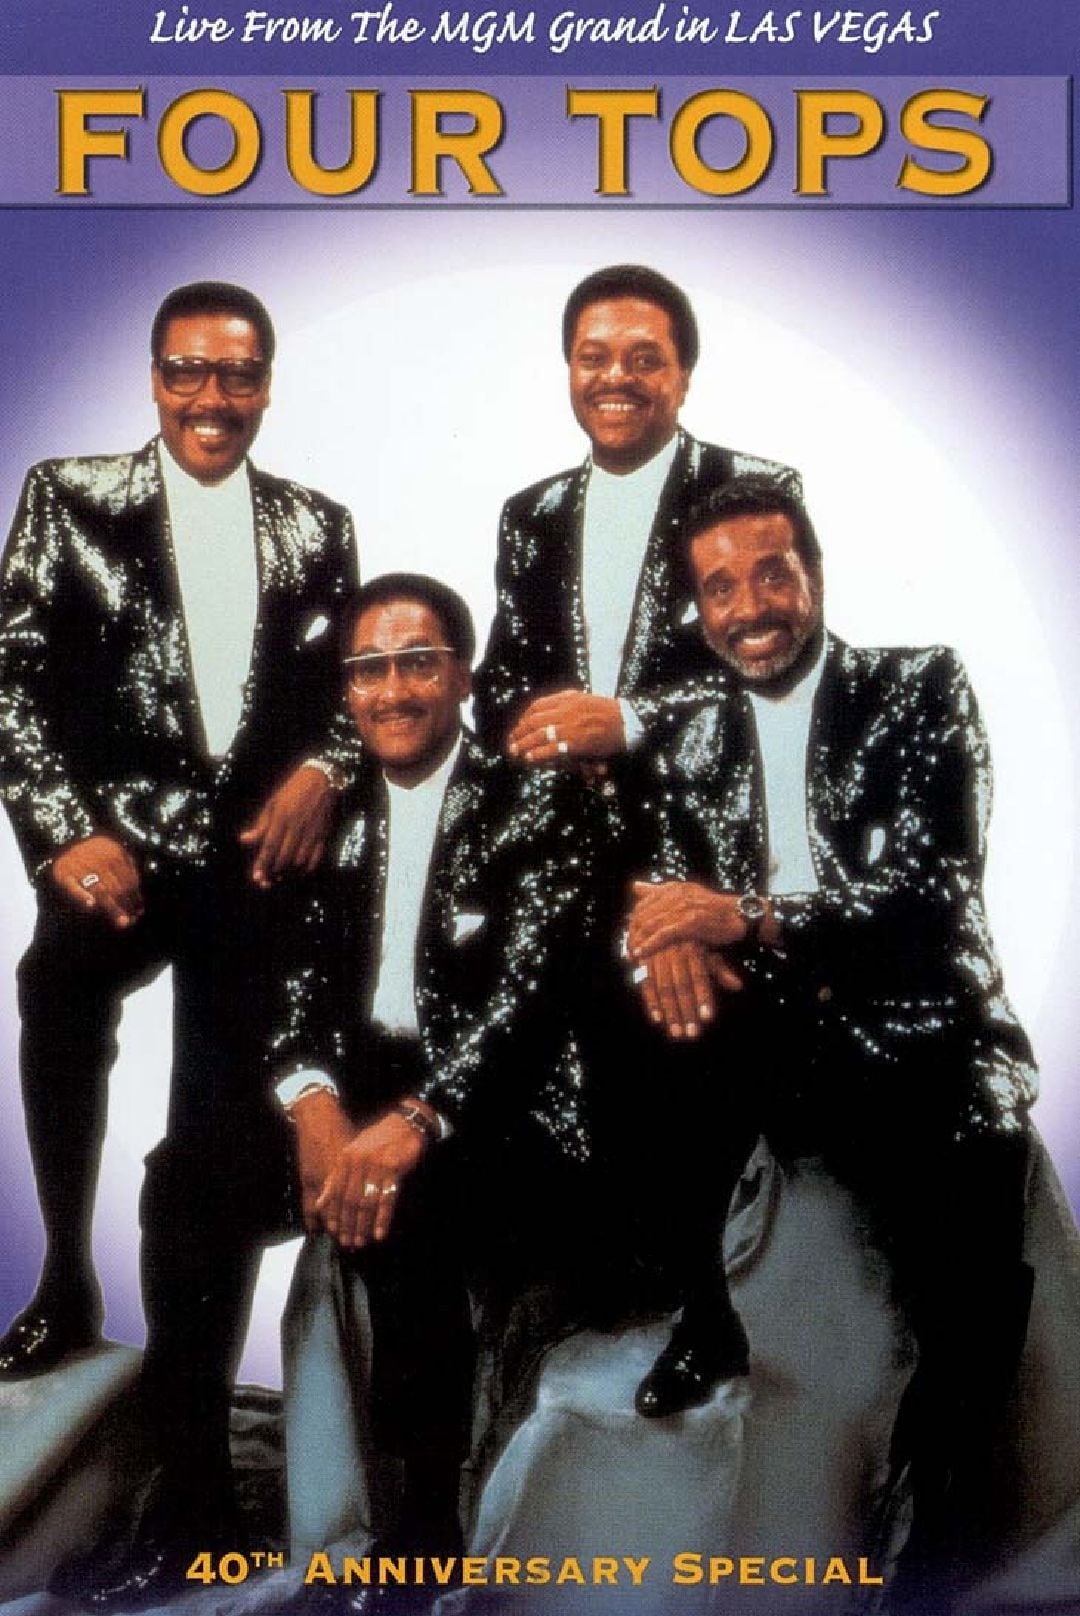 Four Tops Live From The MGM Grand in Las Vegas